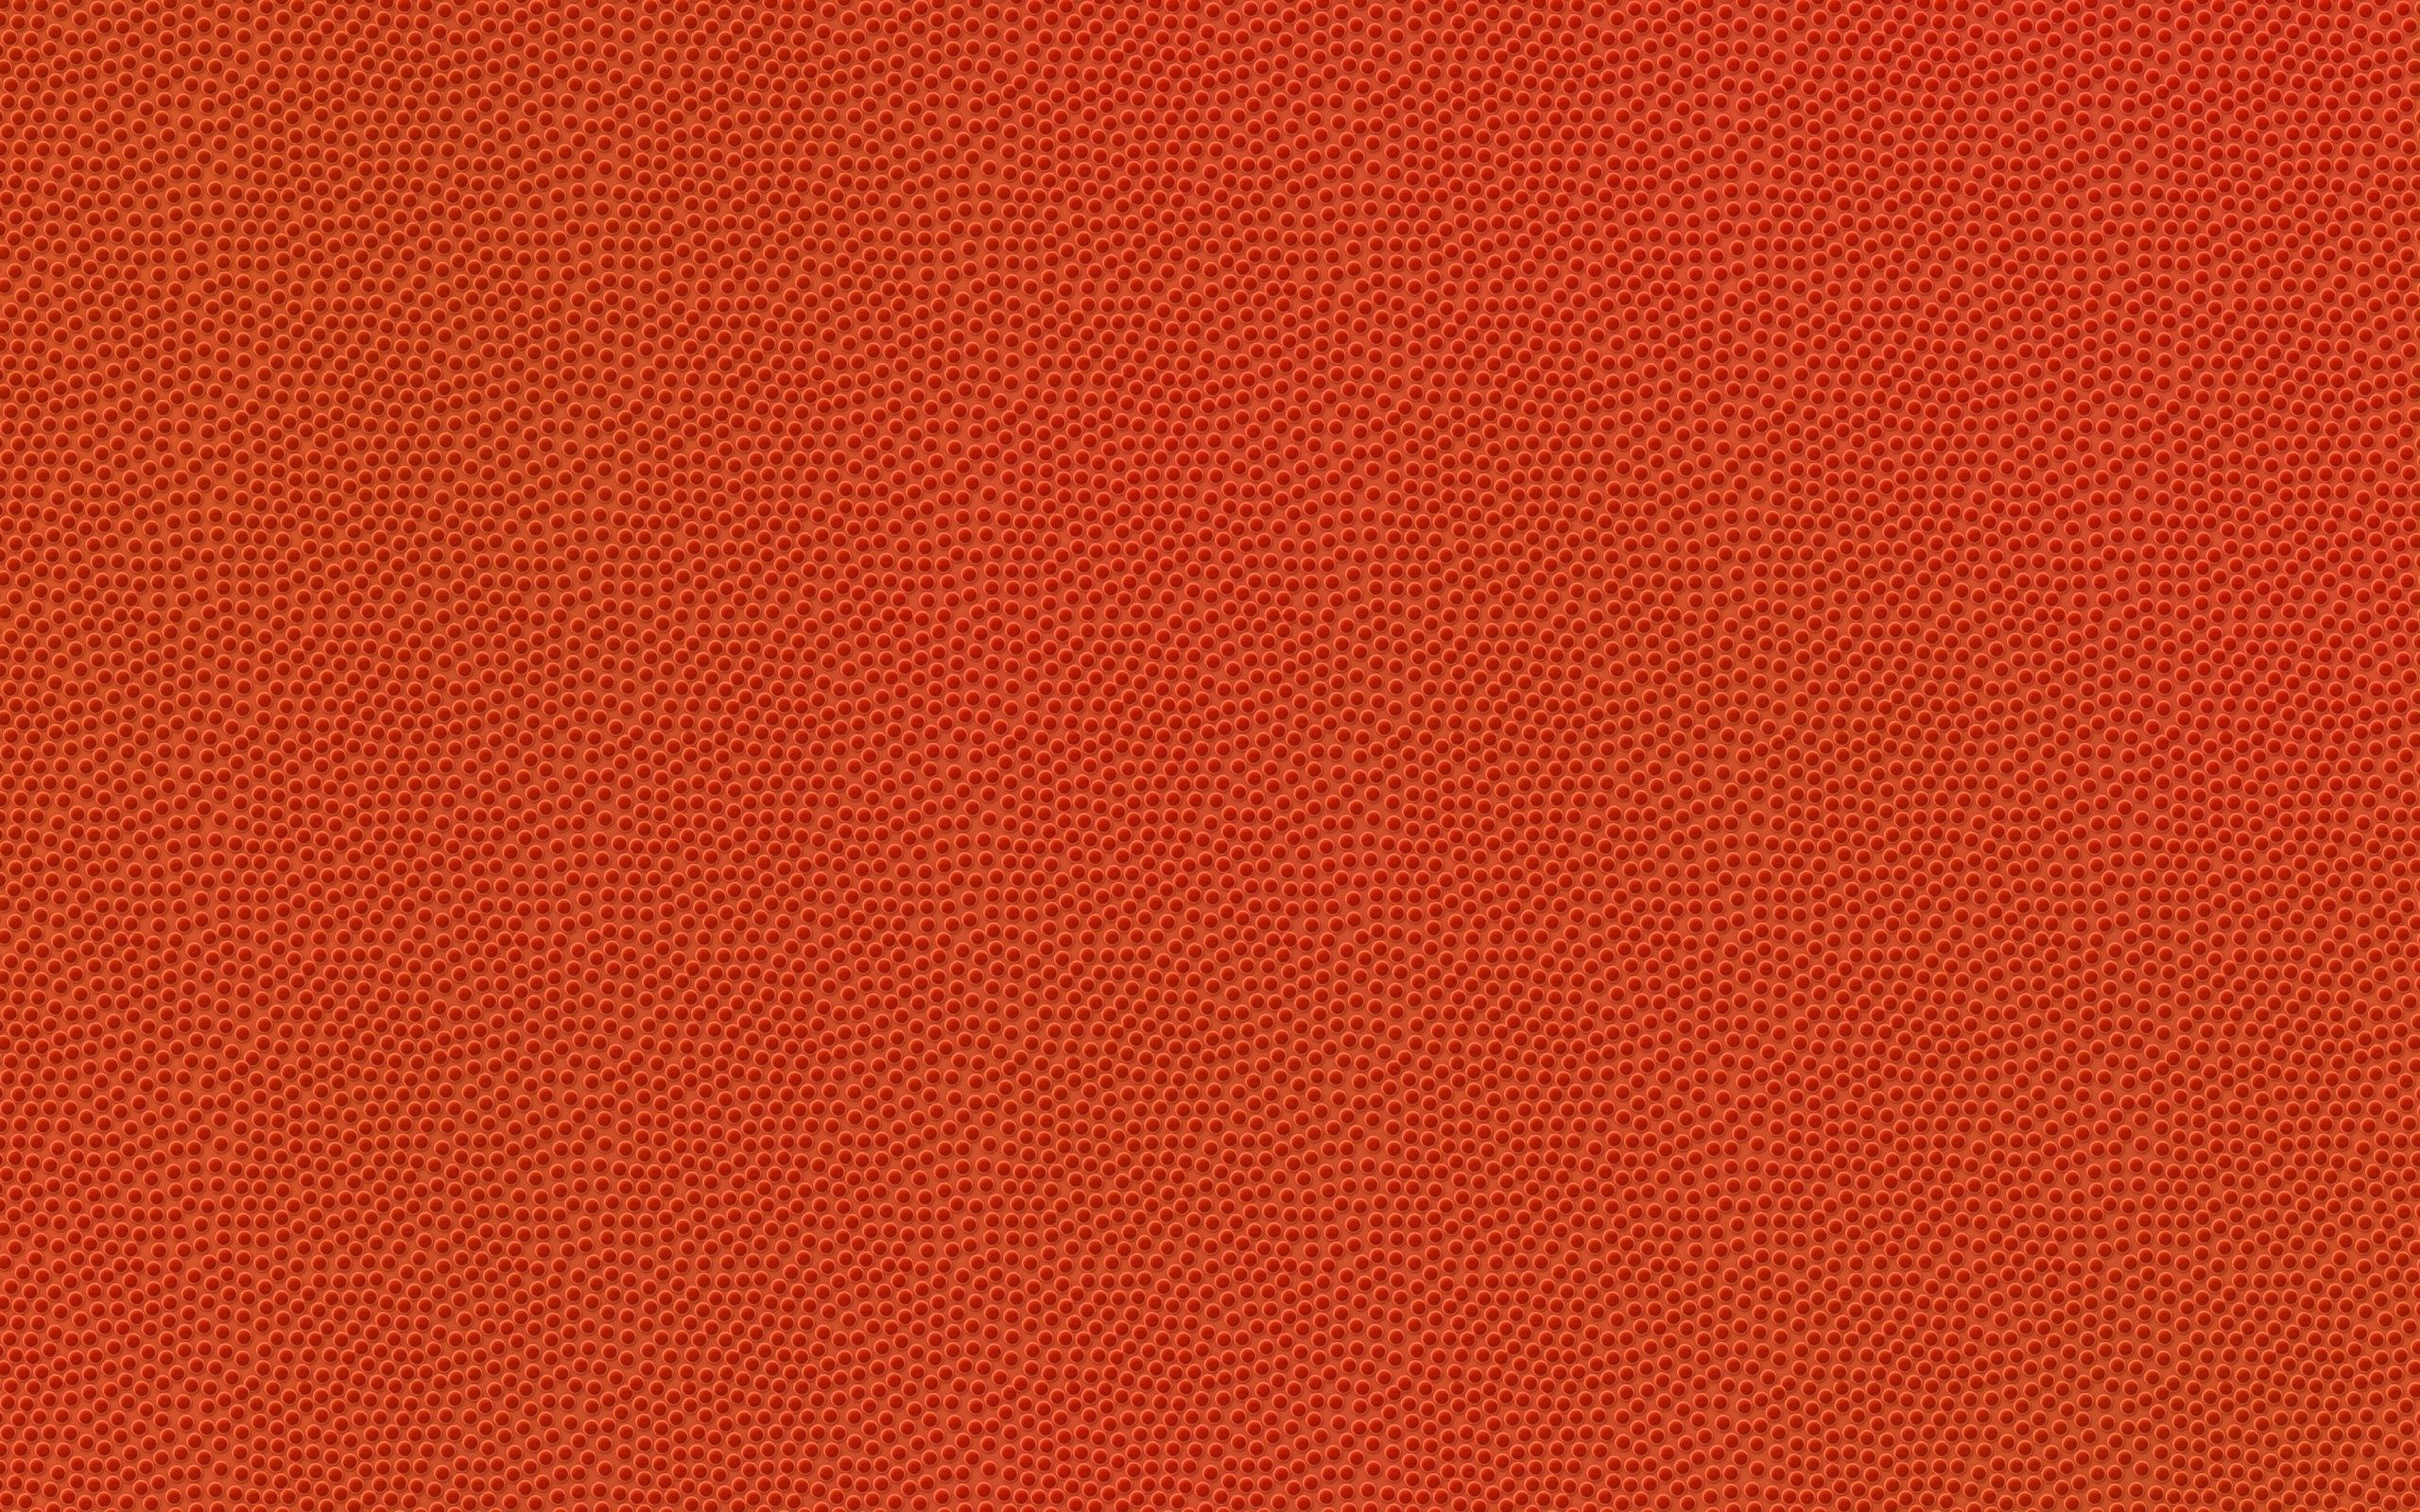 56283 free download Orange wallpapers for phone, point, textures, texture, points Orange images and screensavers for mobile